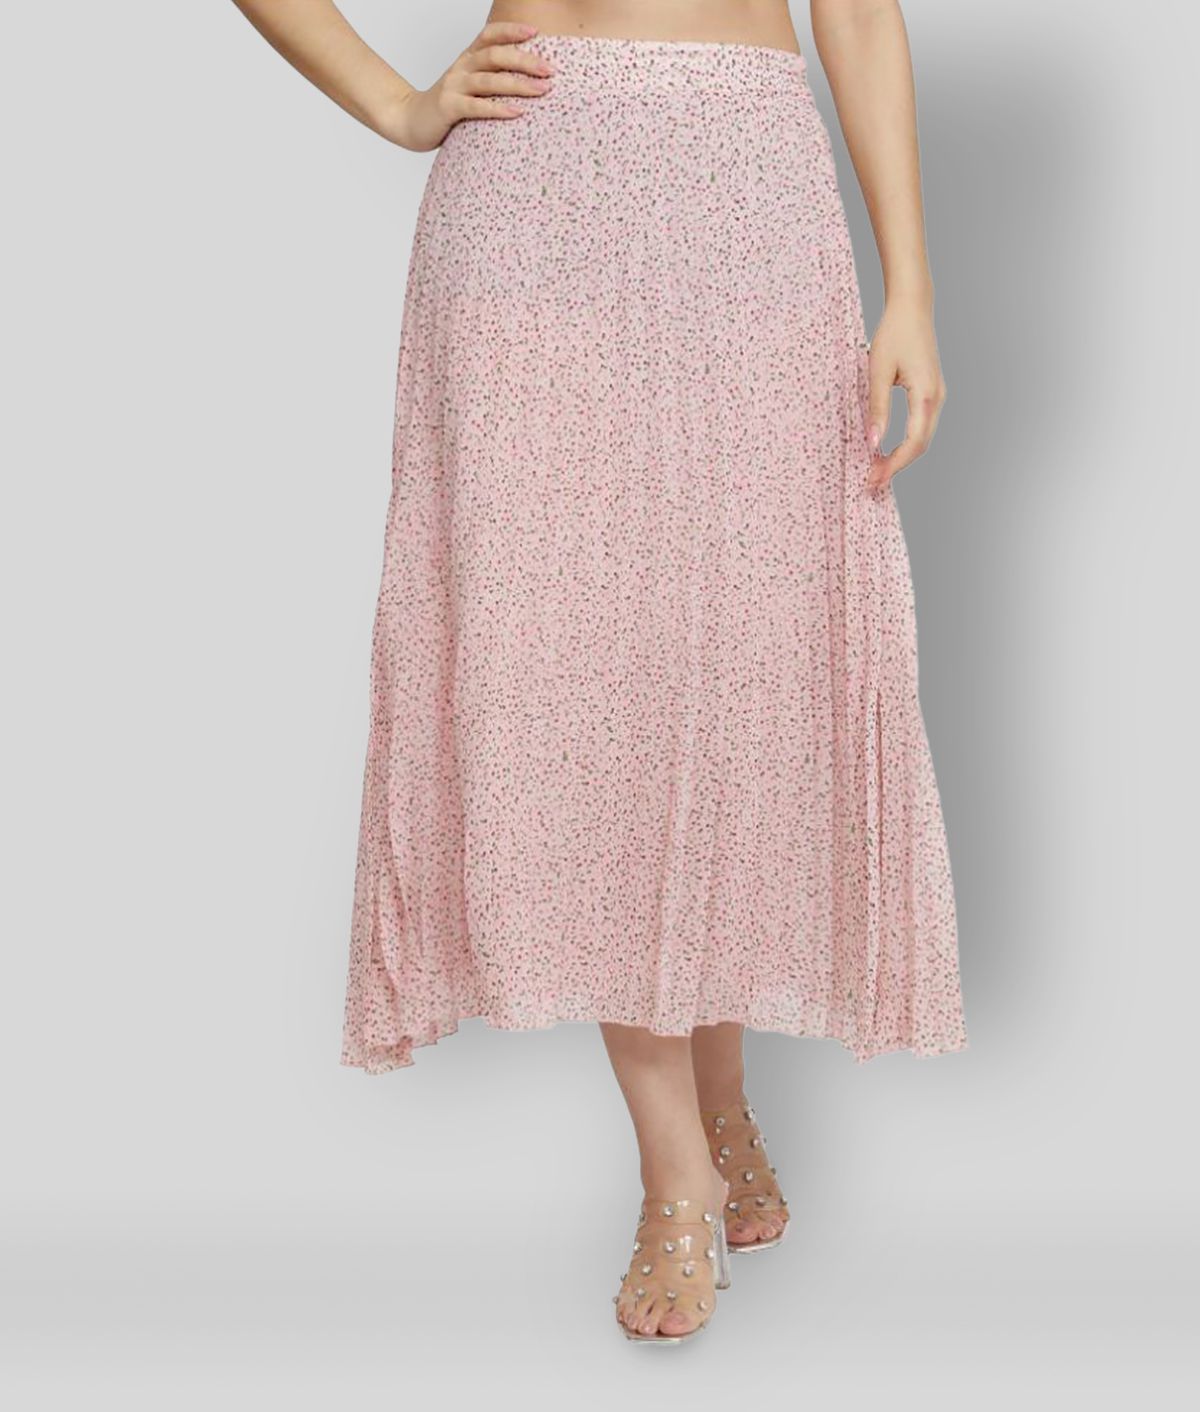 NUEVOSDAMAS - Pink Georgette Women's A-Line Skirt ( Pack of 1 )